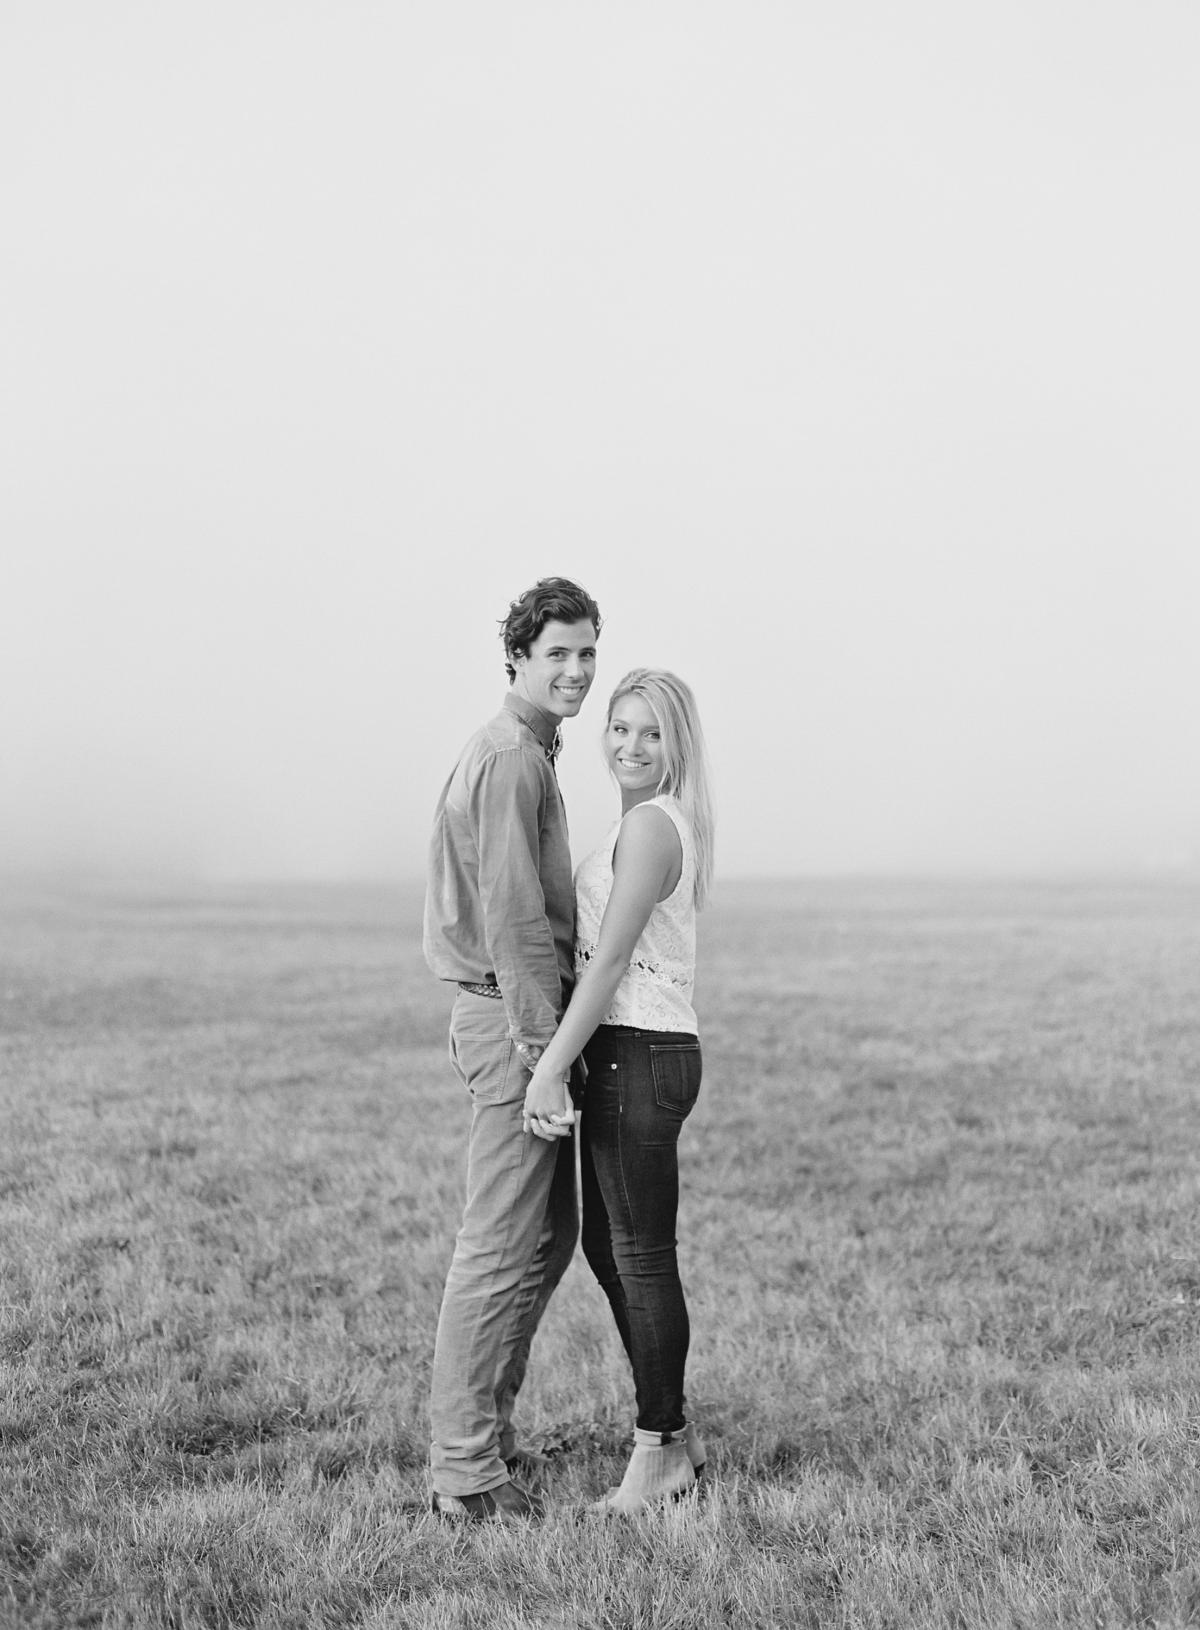 Foggy seattle engagement session by omalley photographers 0002